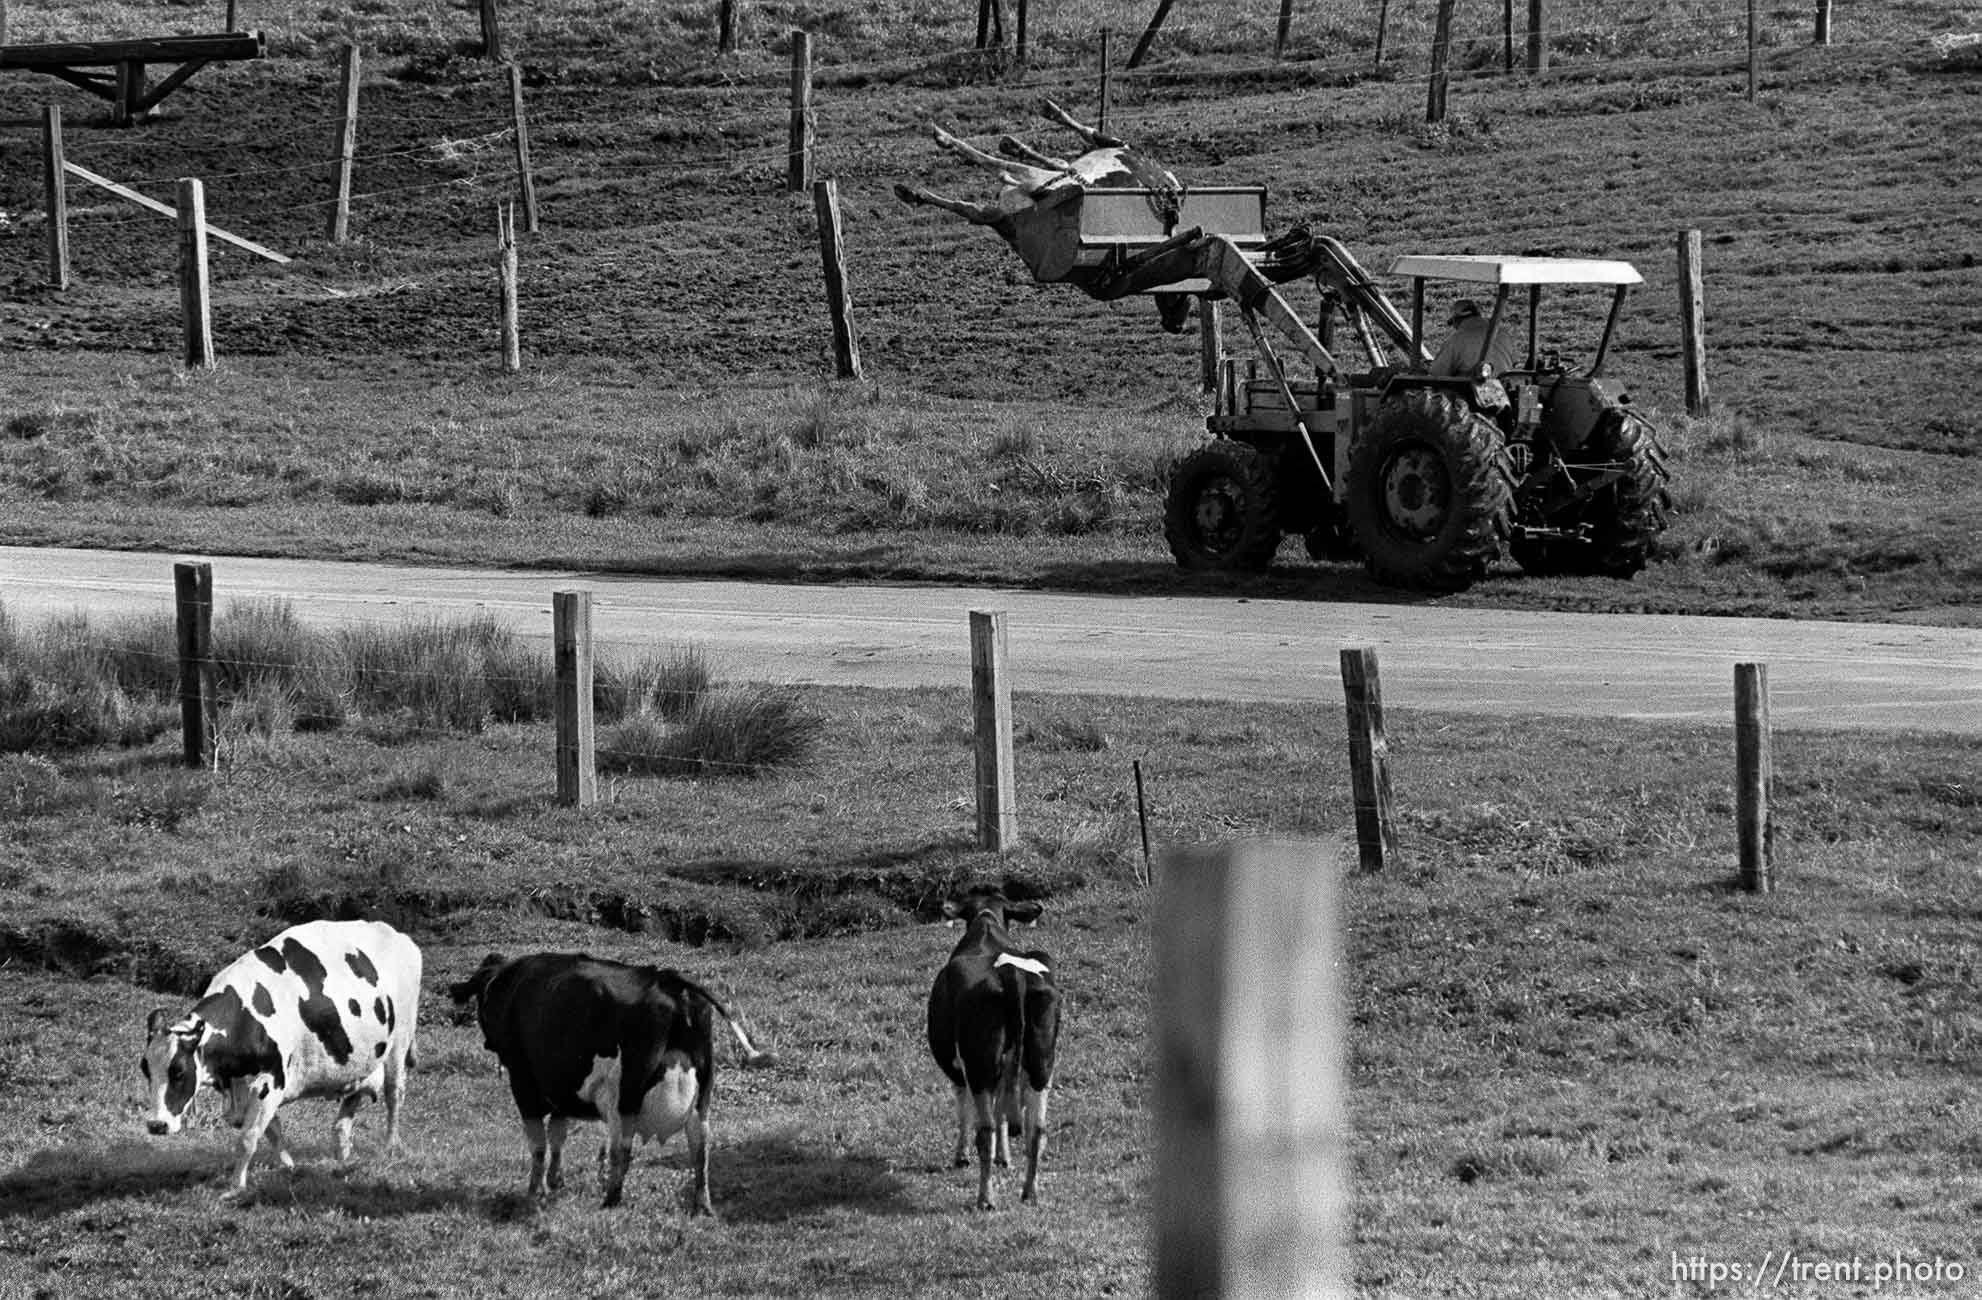 Cows graze and watch as a dead cow is hauled away in a tractor.